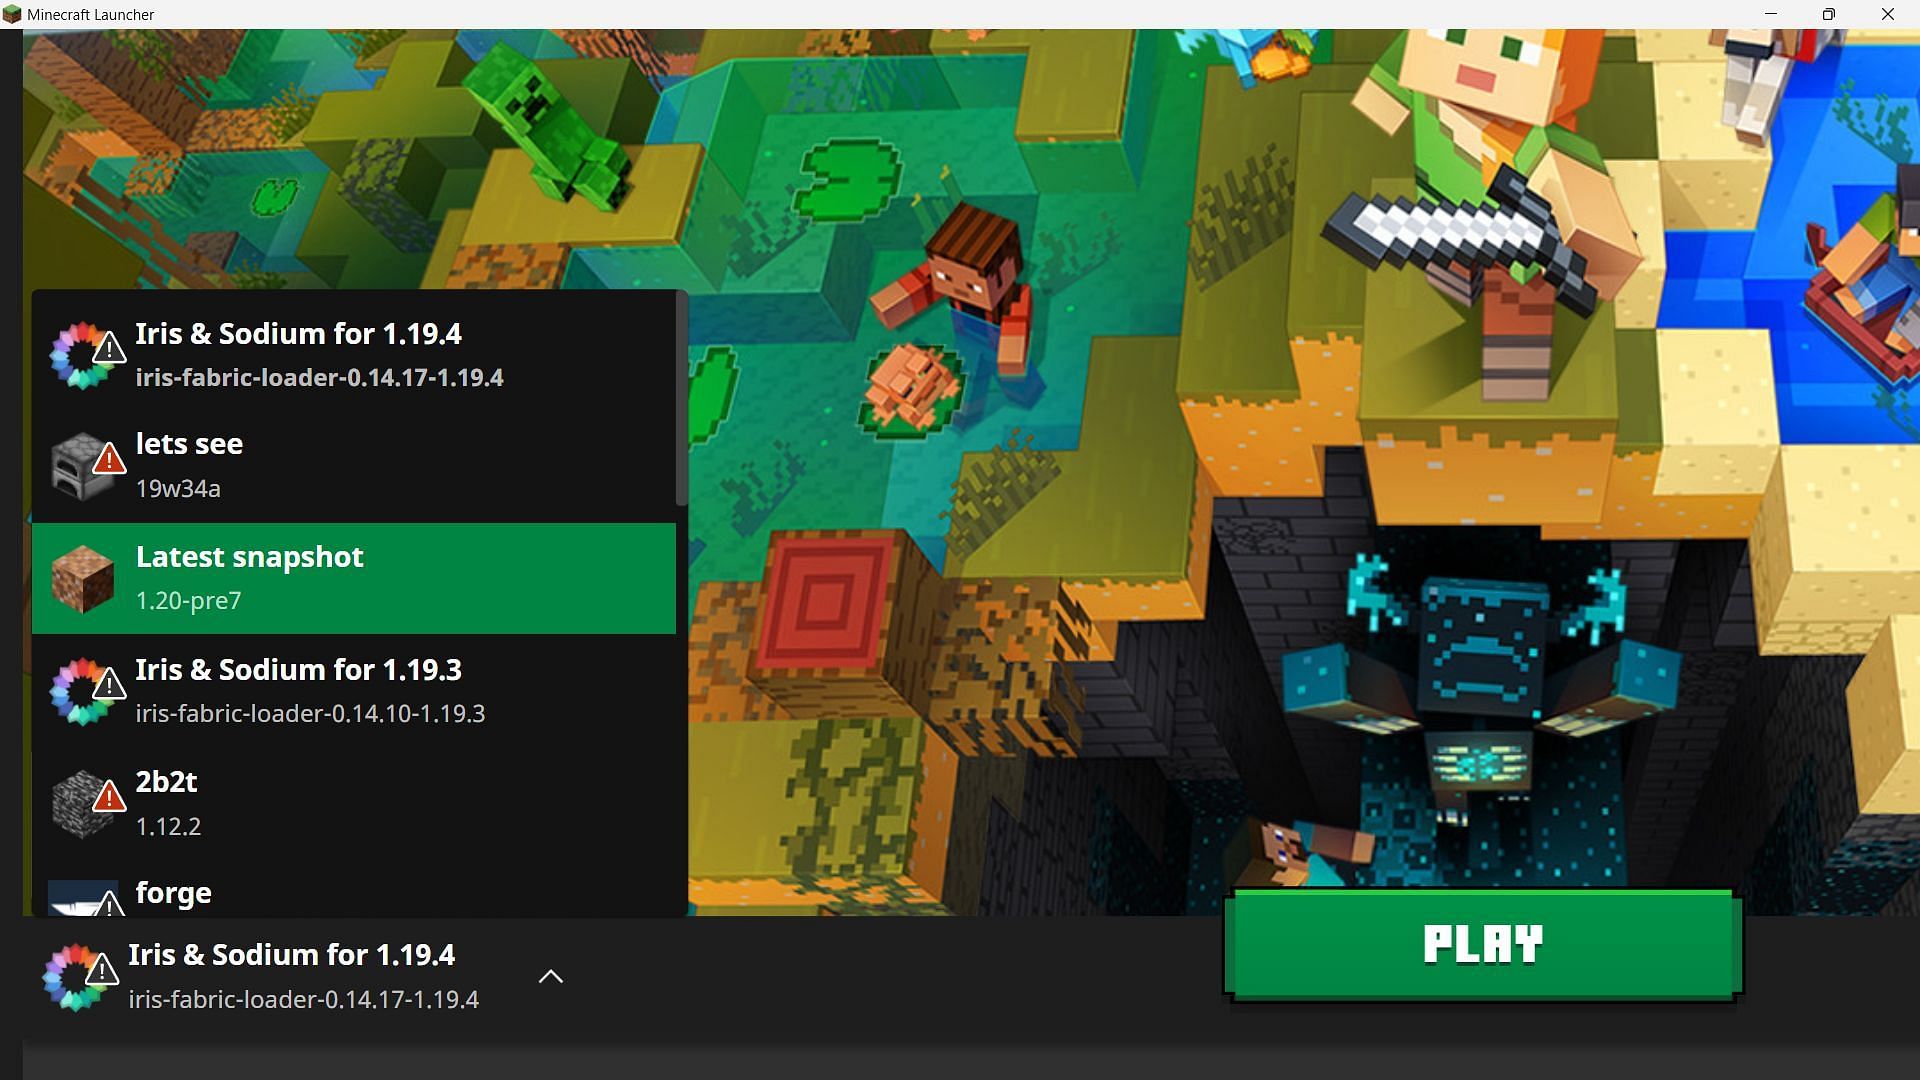 Minecraft 1.20.15.01 OFFICIAL is HERE! (Available on Play Store